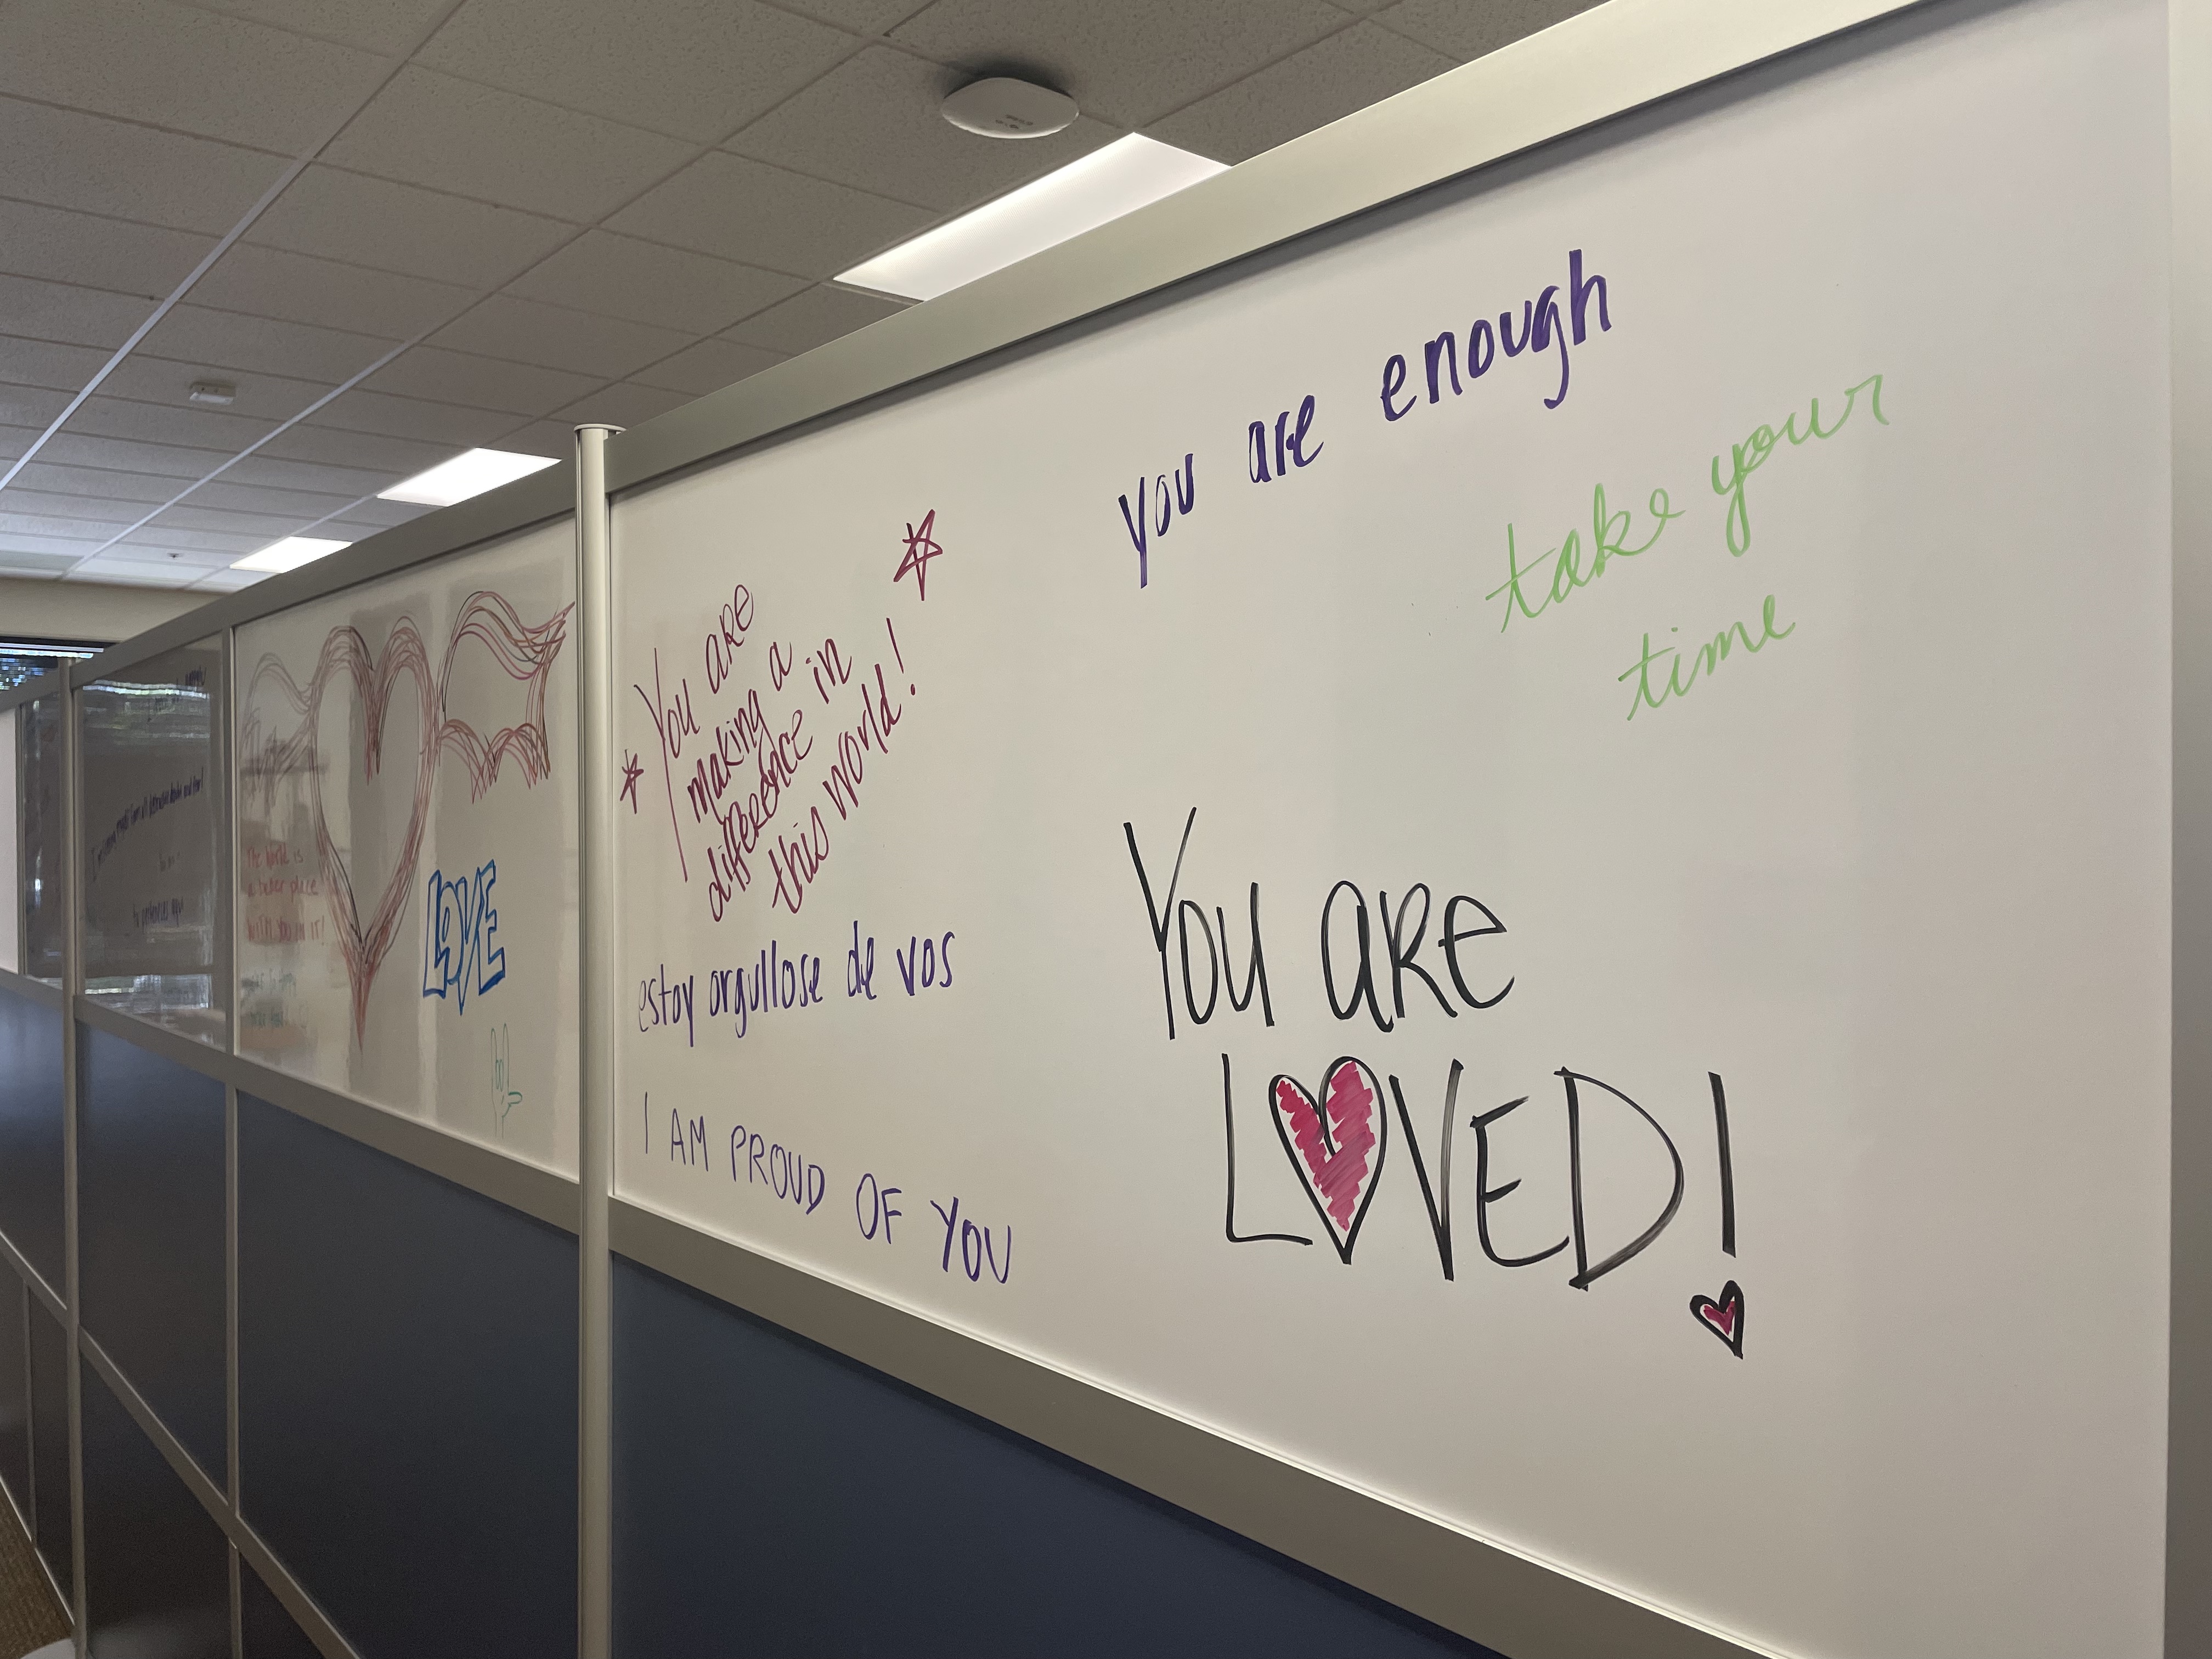 Outside of therapy rooms, the Gender Affirming Care Clinic team writes positive messages for clients to see as they exit their sessions.